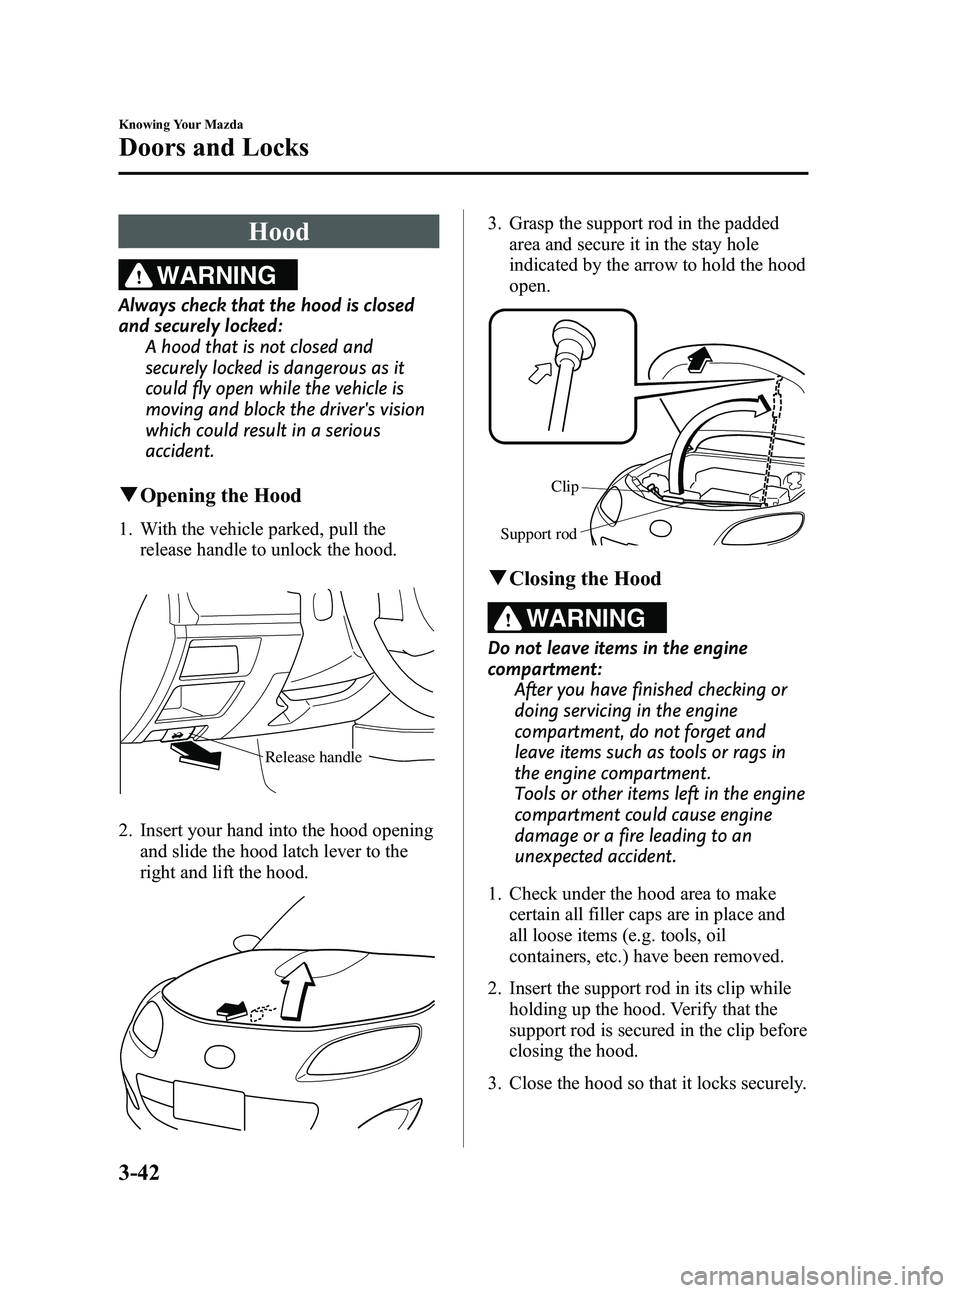 MAZDA MODEL MX-5 MIATA POWER RETRACTABLE HARDTOP 2010  Owners Manual Black plate (104,1)
Hood
WARNING
Always check that the hood is closed
and securely locked:A hood that is not closed and
securely locked is dangerous as it
could fly open while the vehicle is
moving an